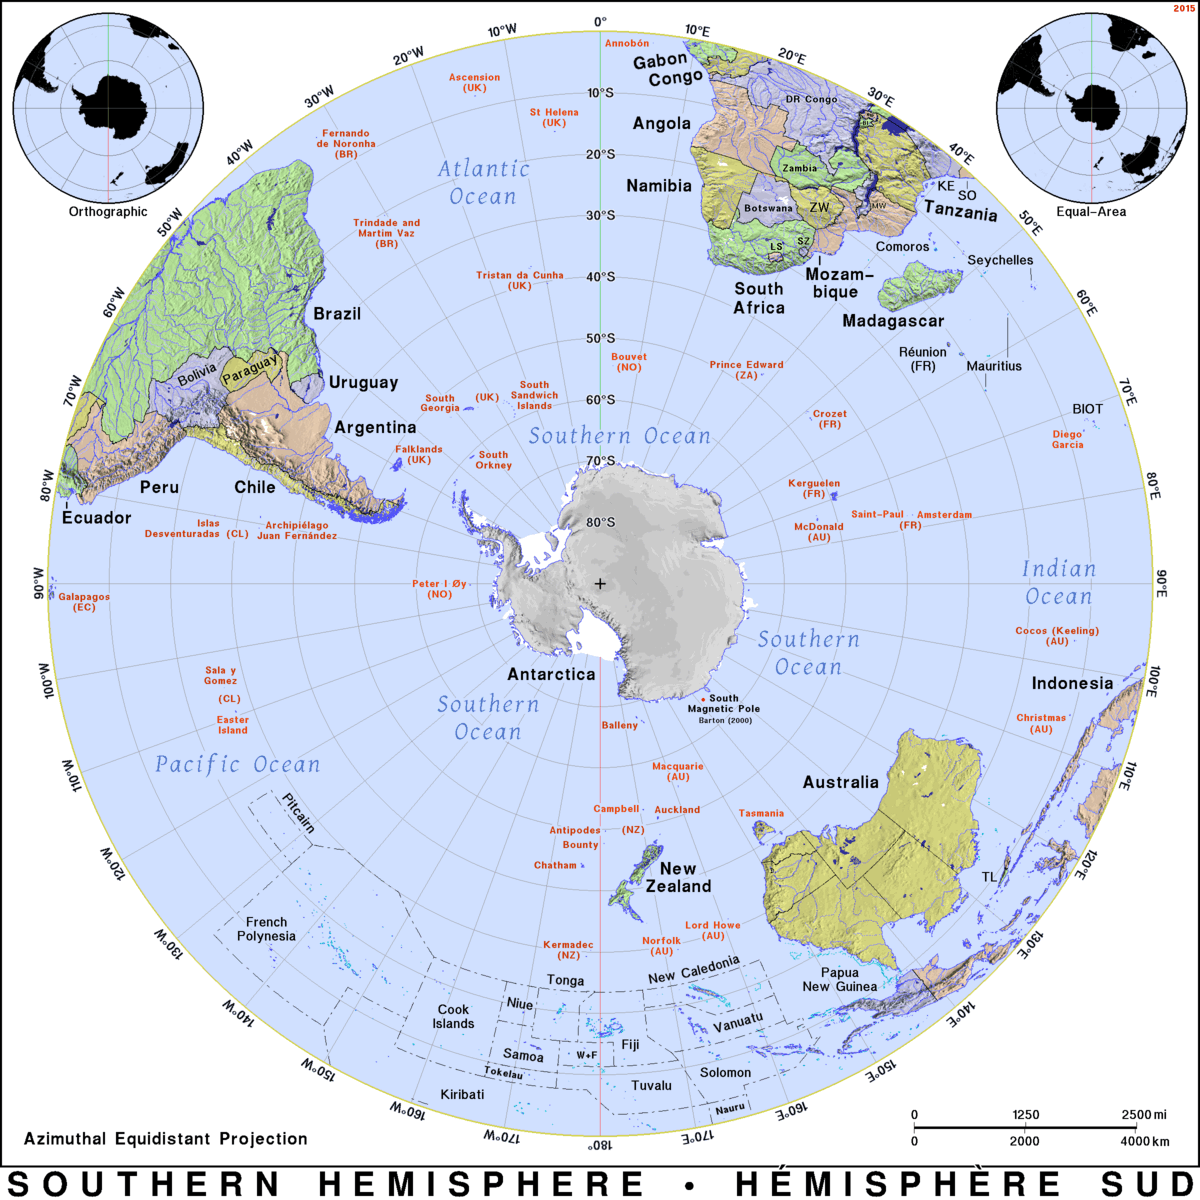 southern-hemisphere-public-domain-maps-by-pat-the-free-open-source